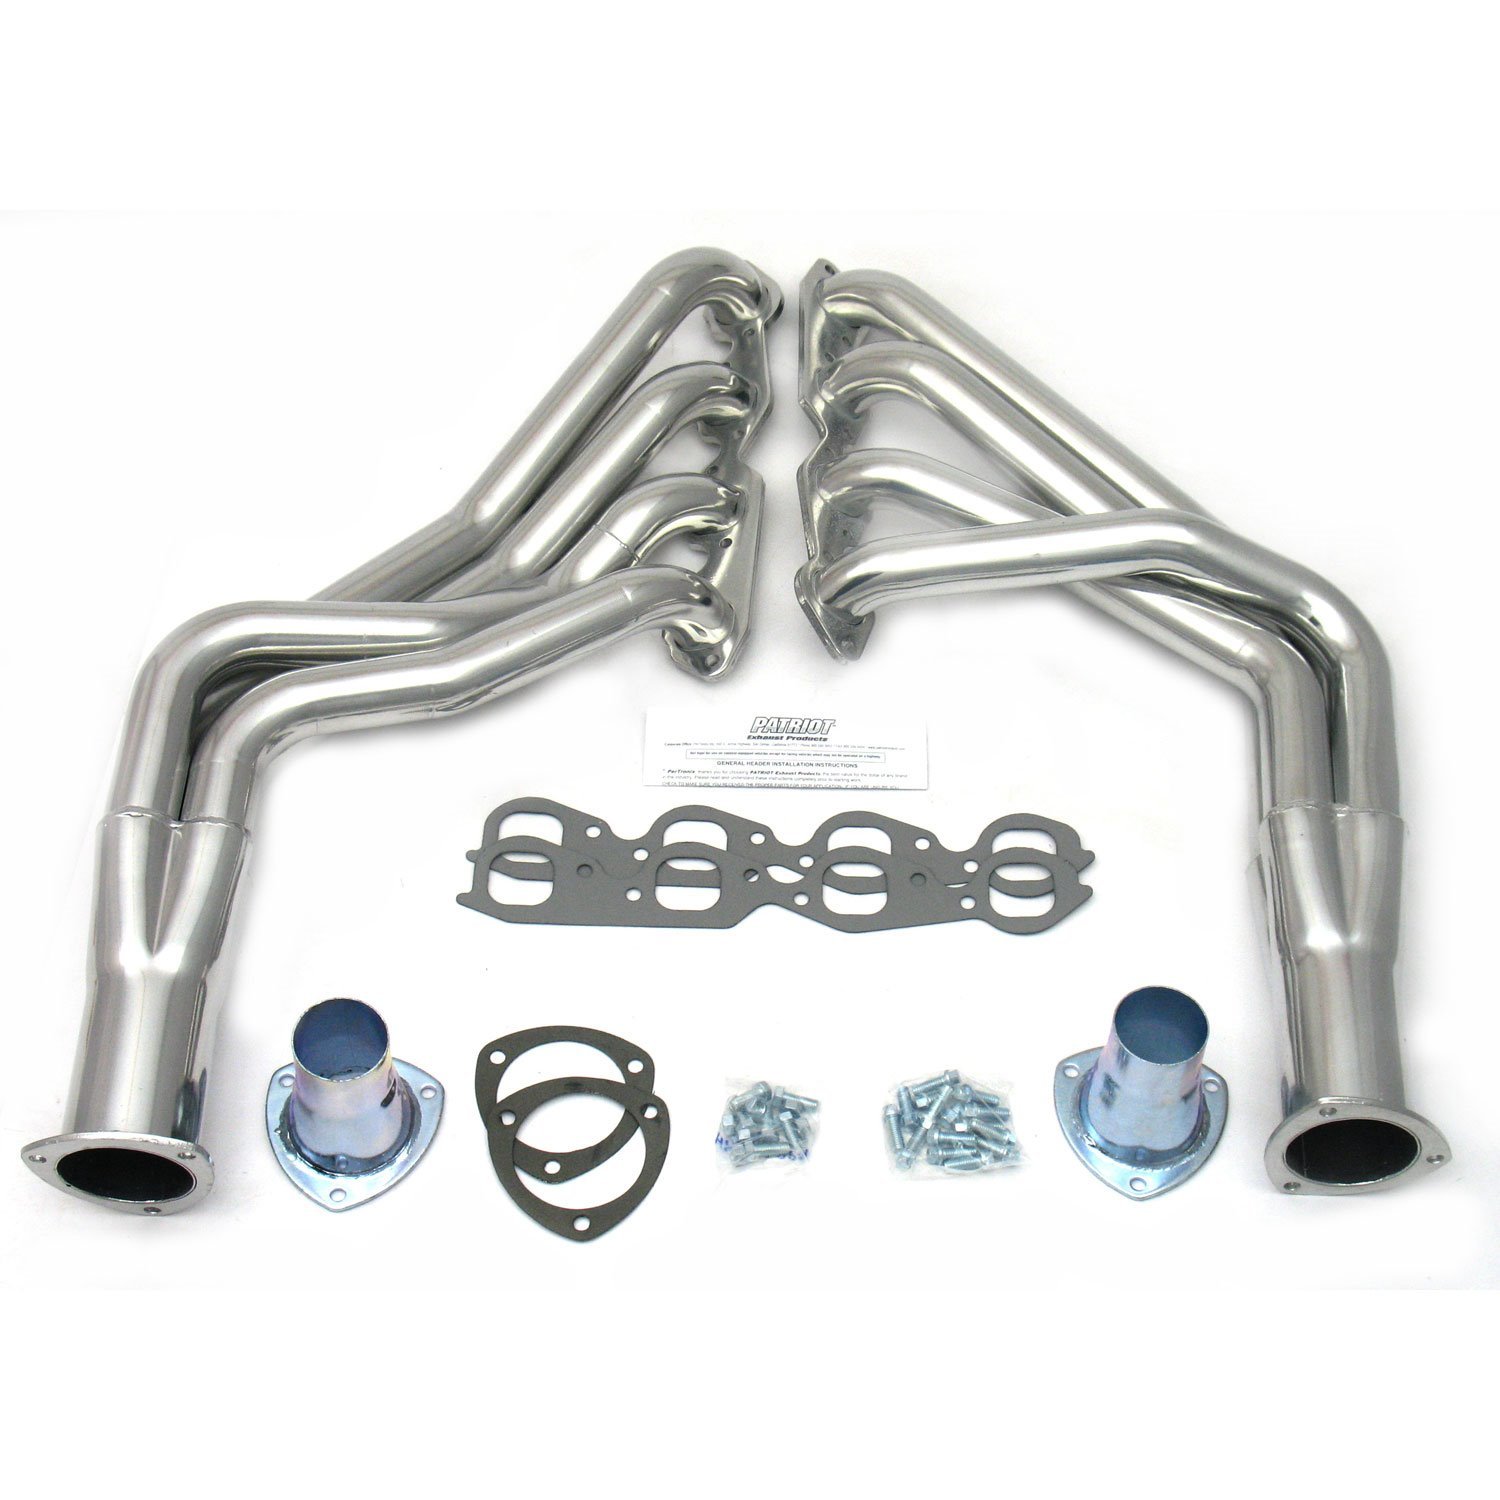 GM Specific Fit Headers 1965-1970 Full Size Passenger Car